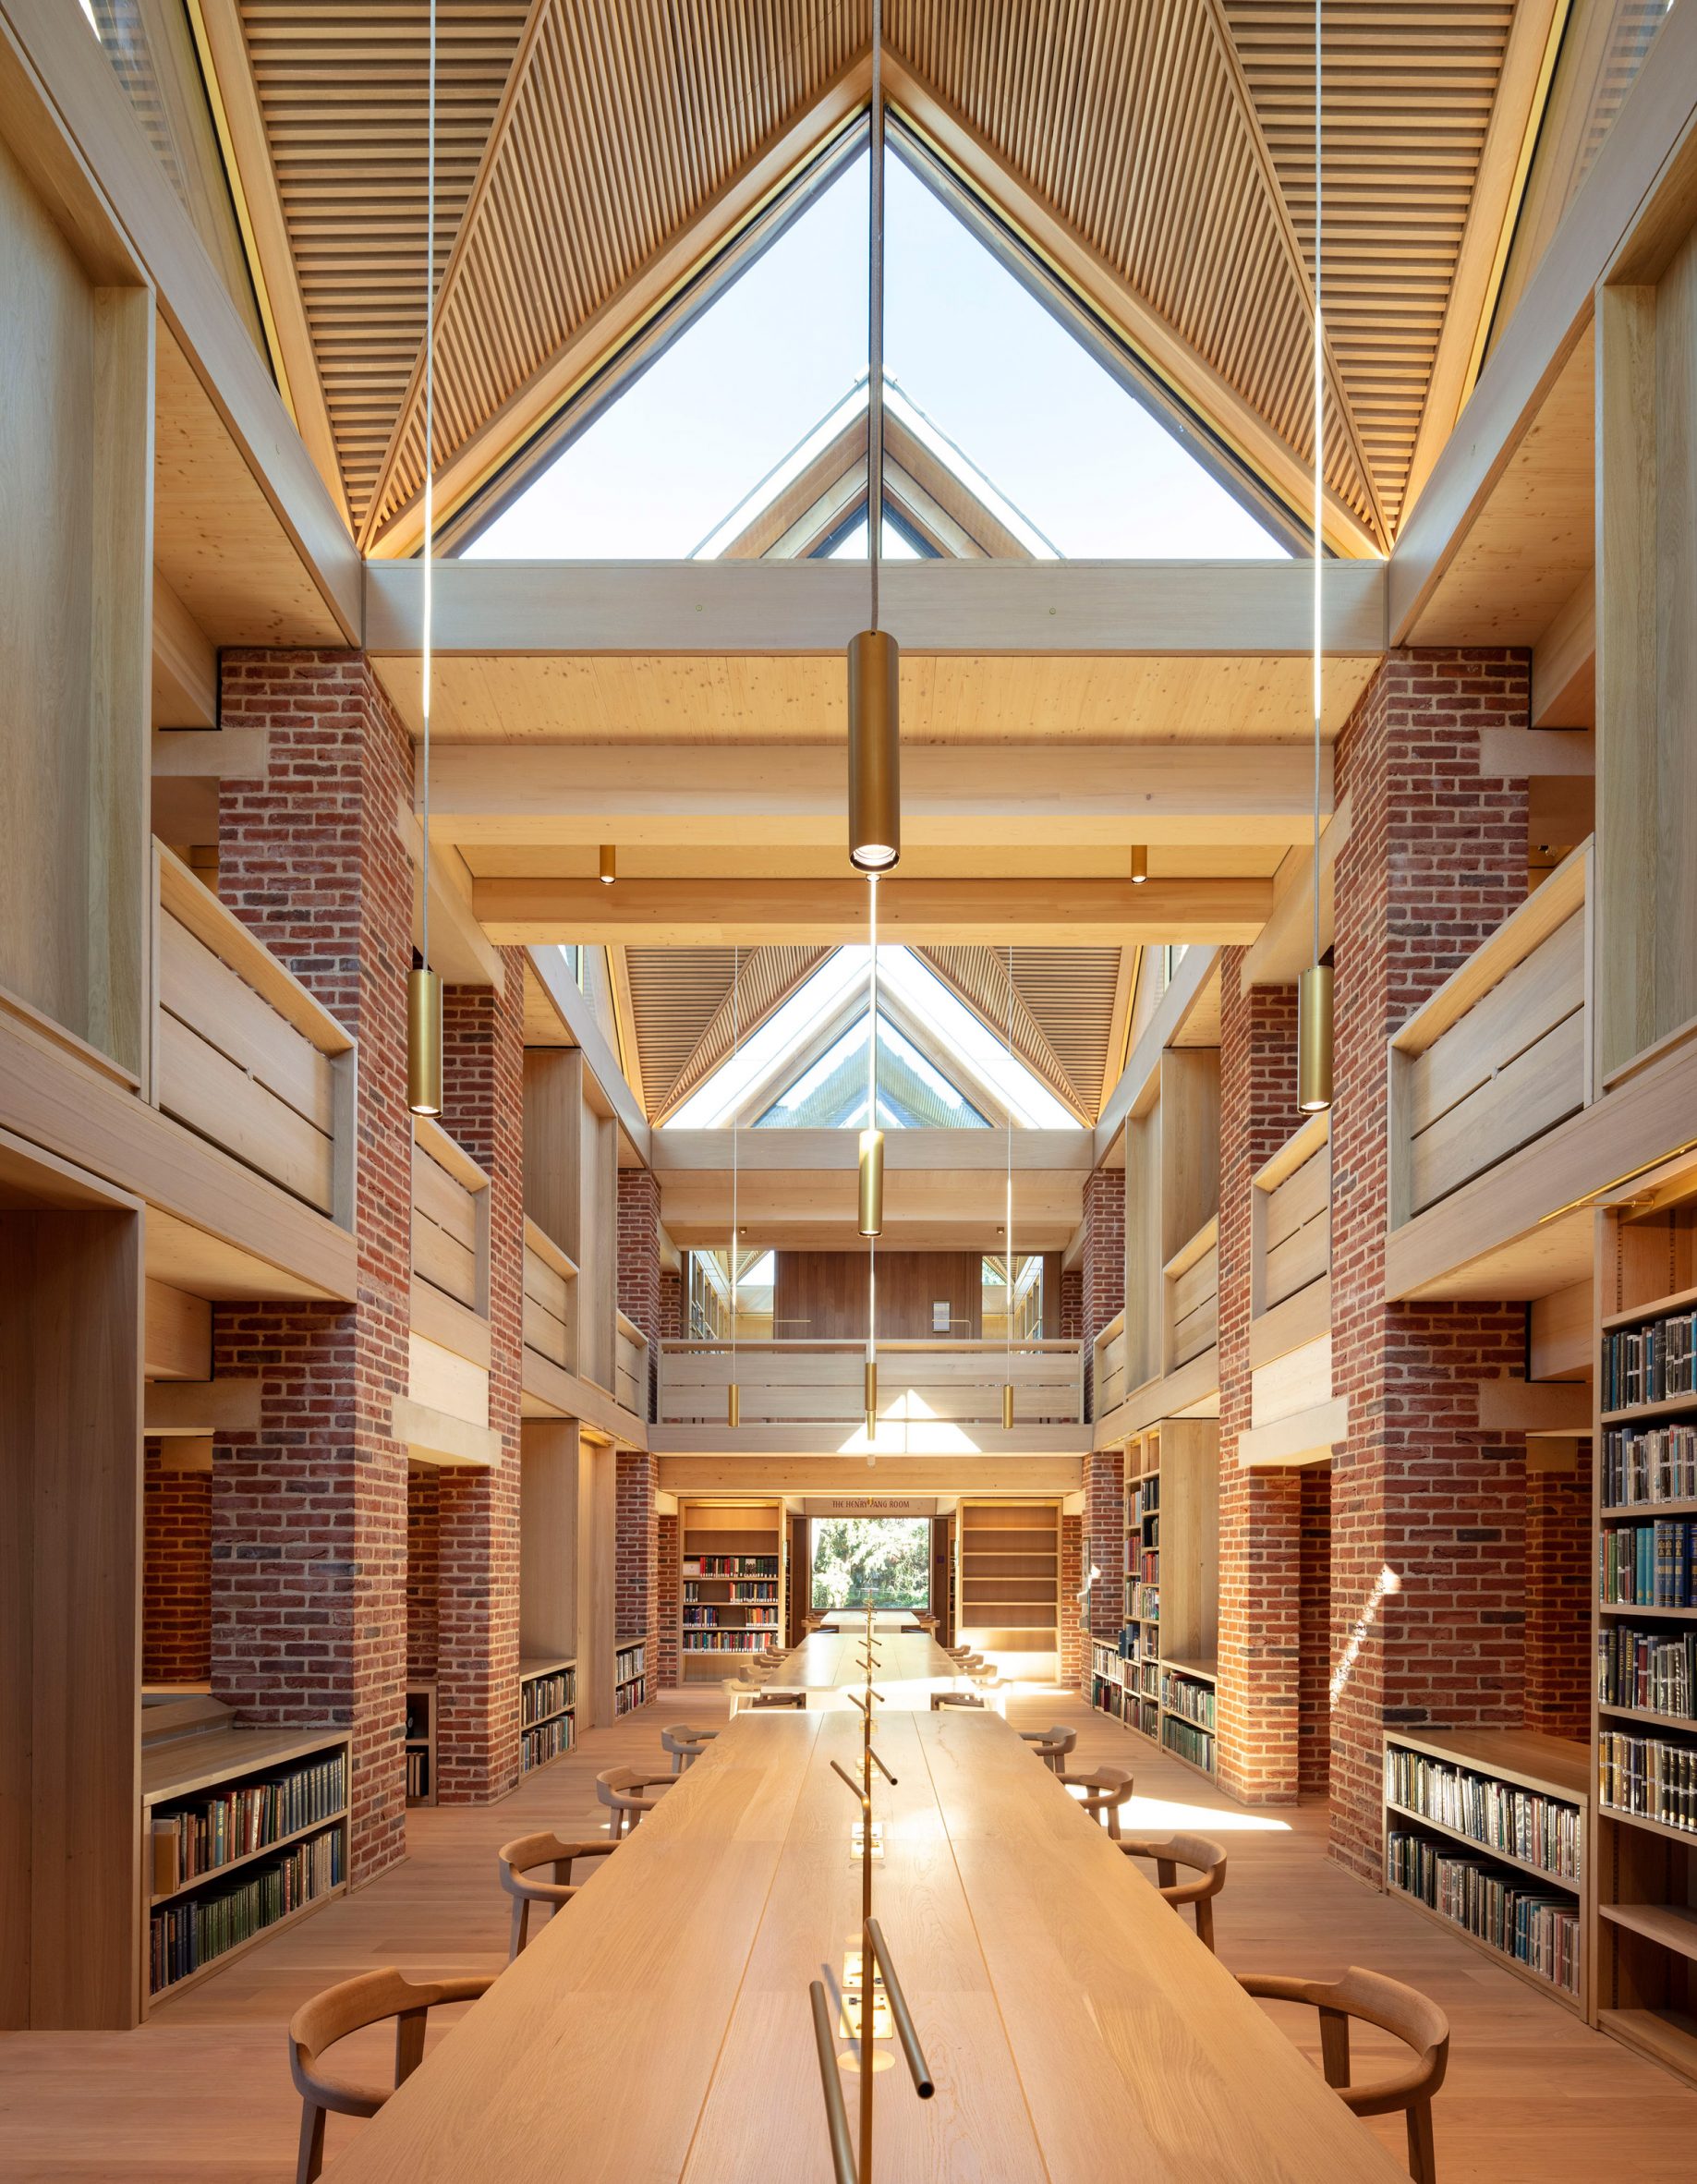 The New Library at Magdalene College won the Stirling Prize